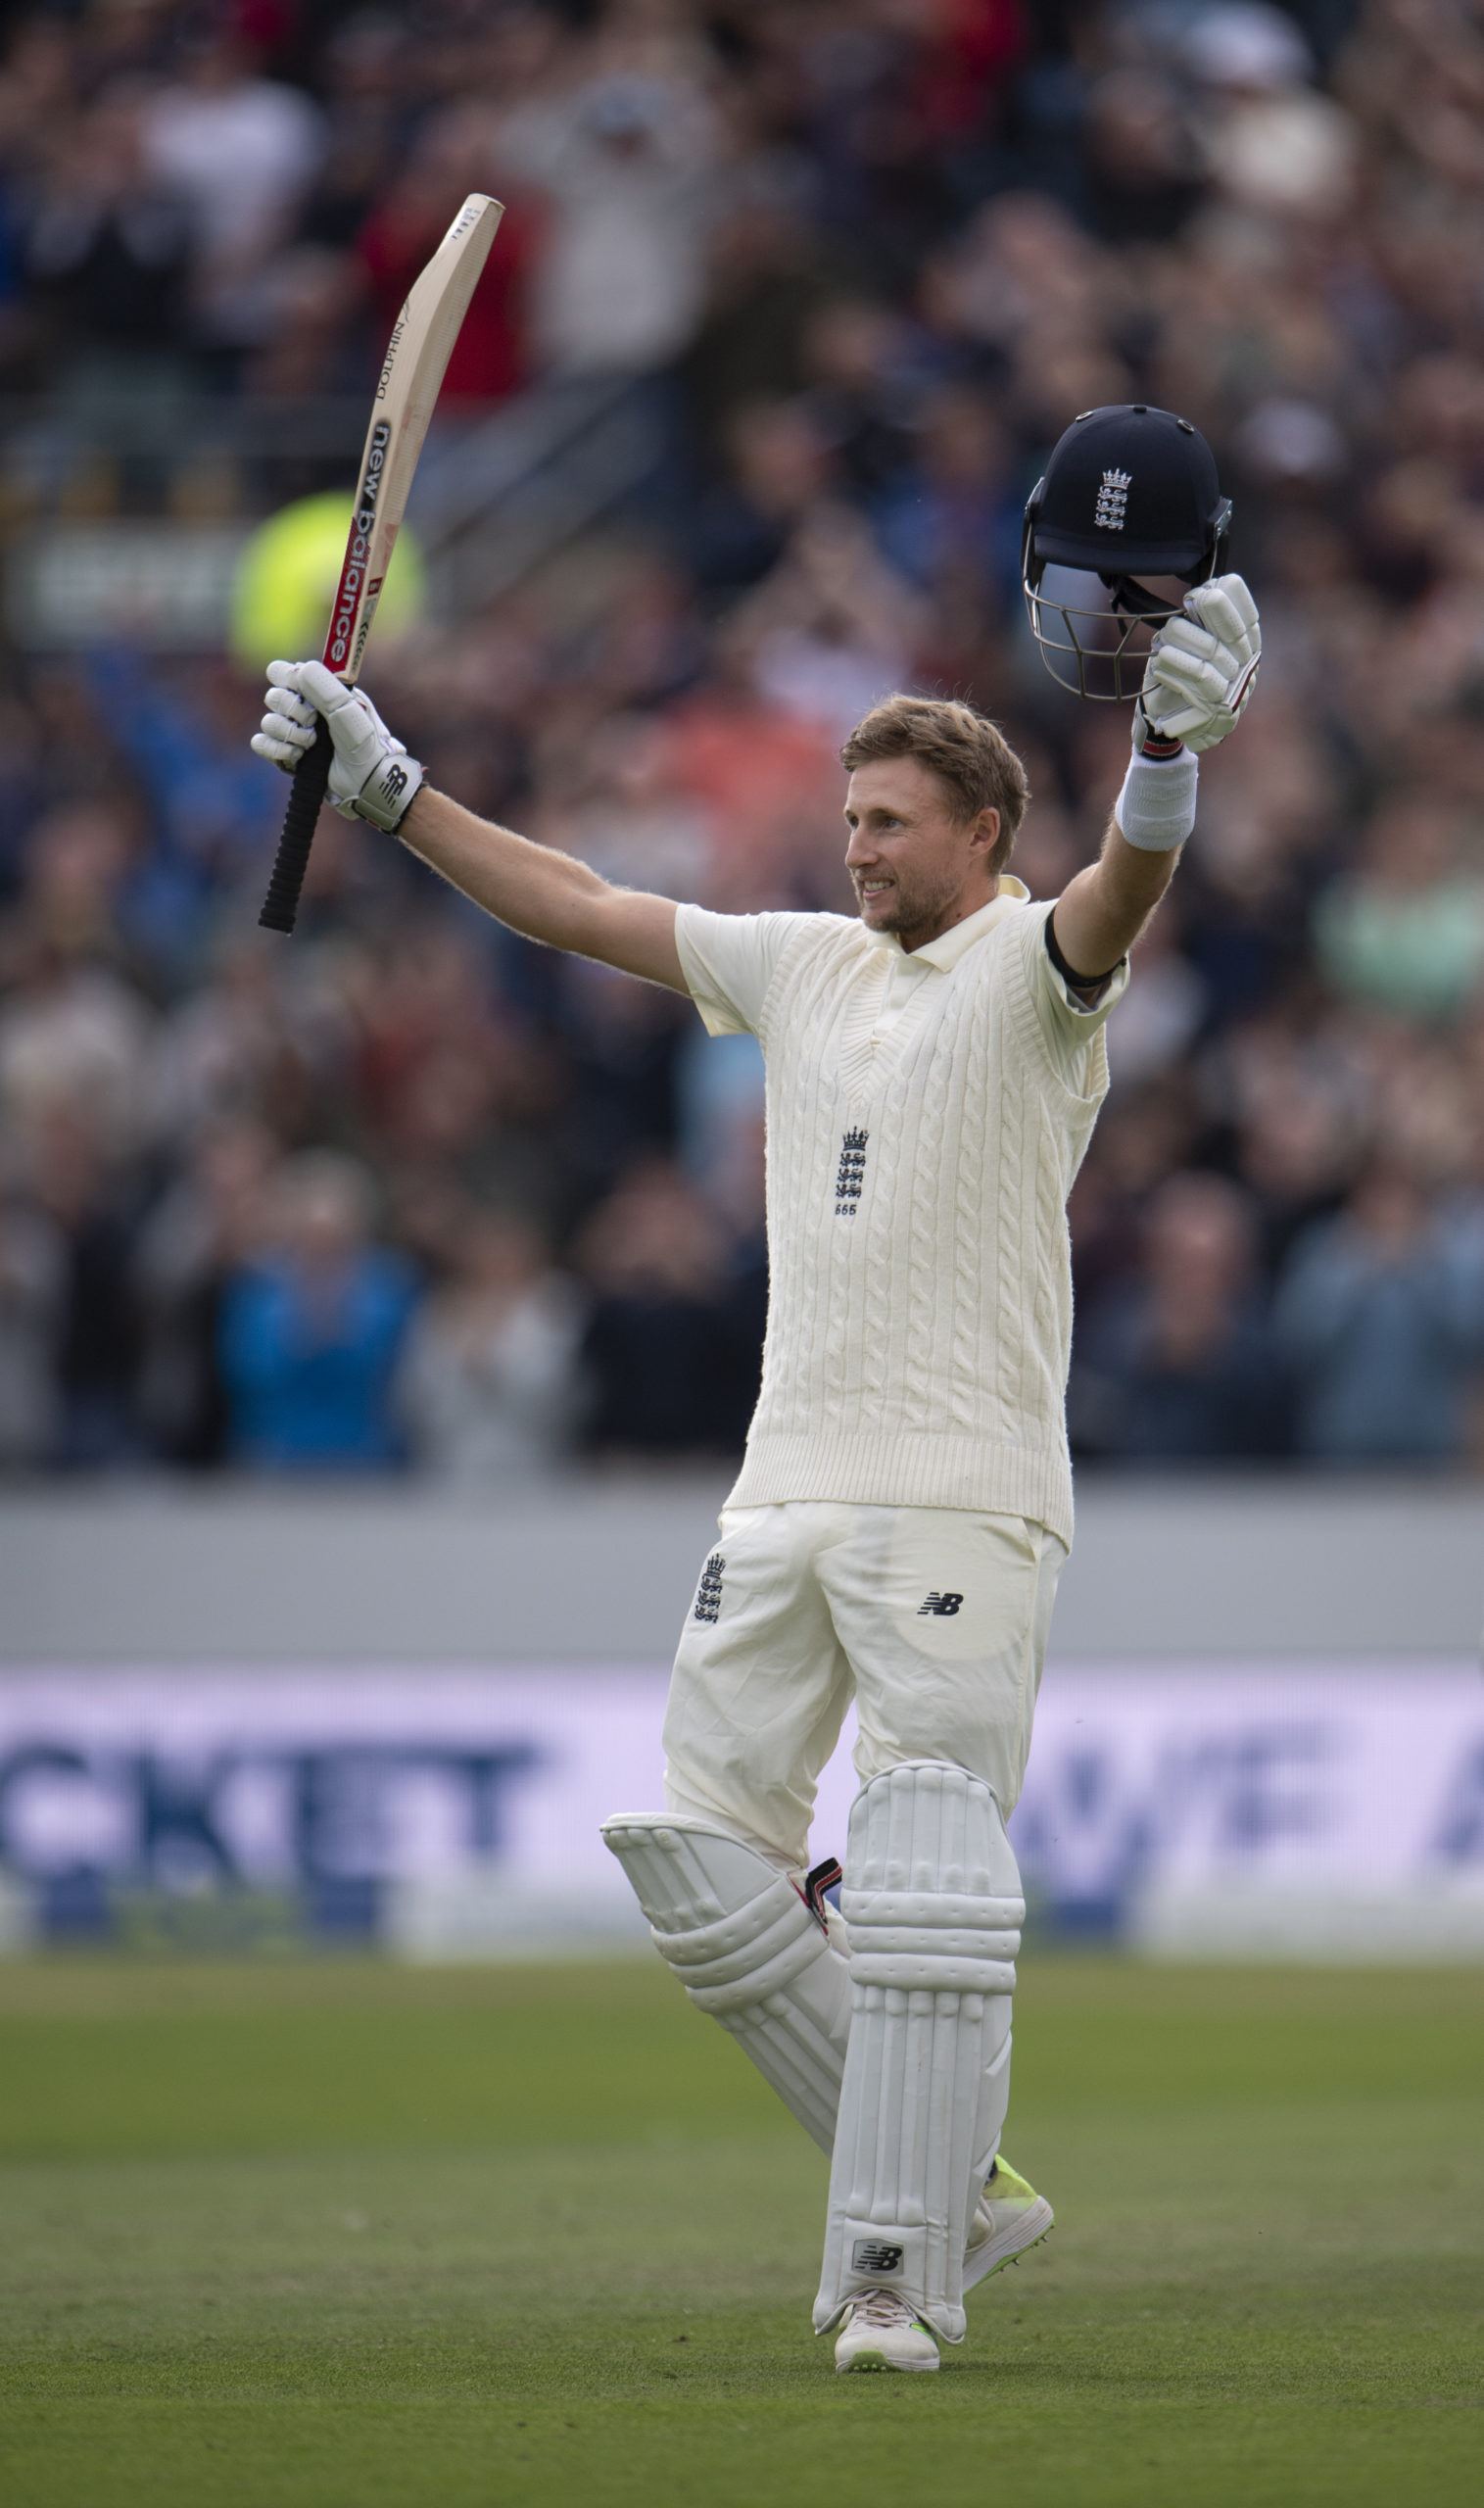 Joe Root Profile (Photo by Visionhaus/Getty Images).